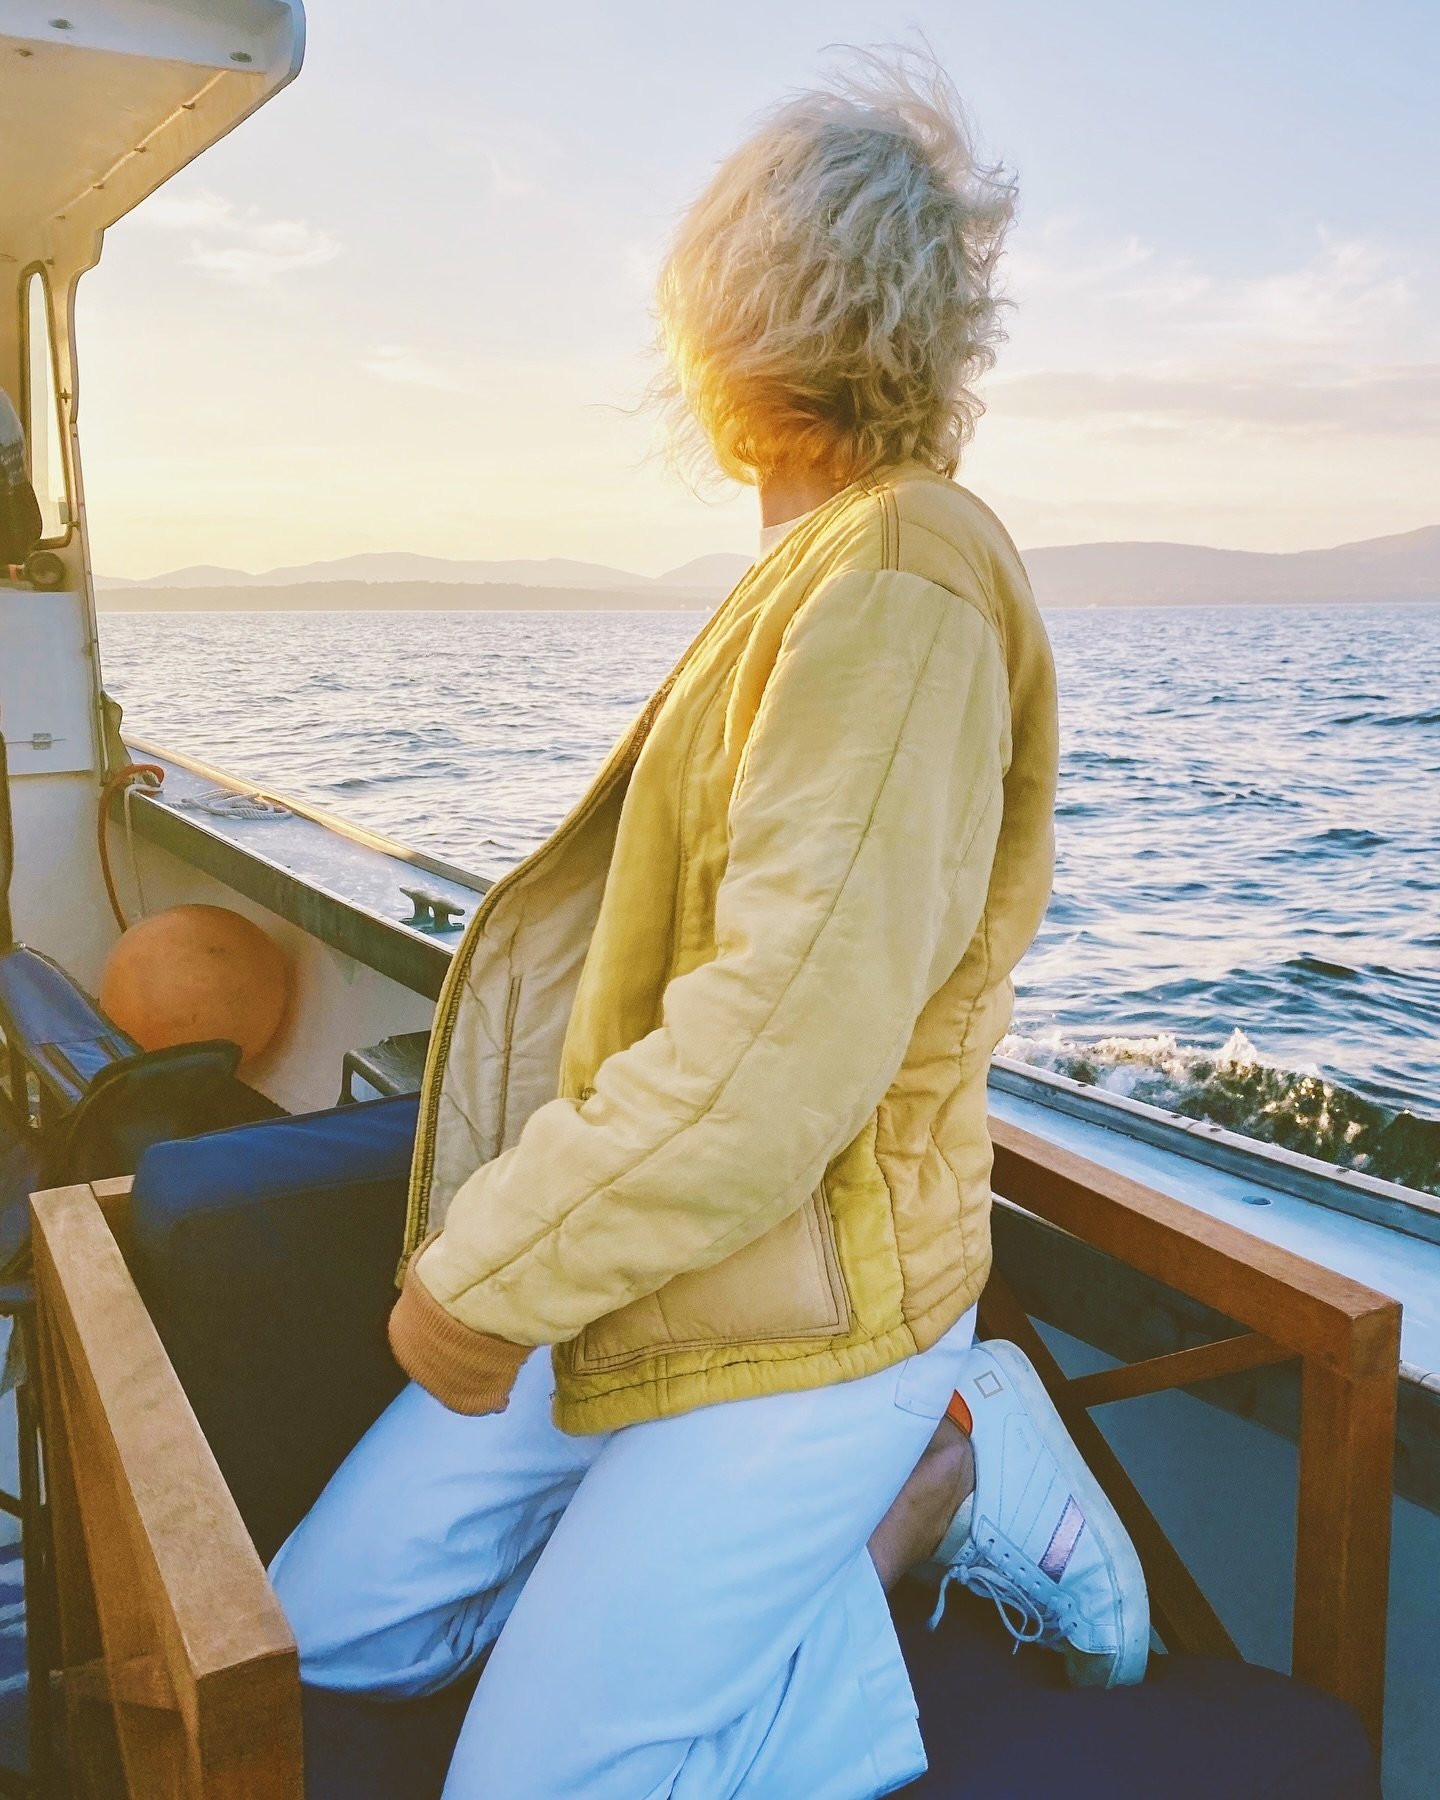 Immerse yourself in the enchanting glow of summer&rsquo;s twilight with Moondog Excursions. Our sunset cruise offers a front-row seat to nature&rsquo;s grand spectacle. Don&rsquo;t miss the chance to bask in the serene beauty of the evening on the wa